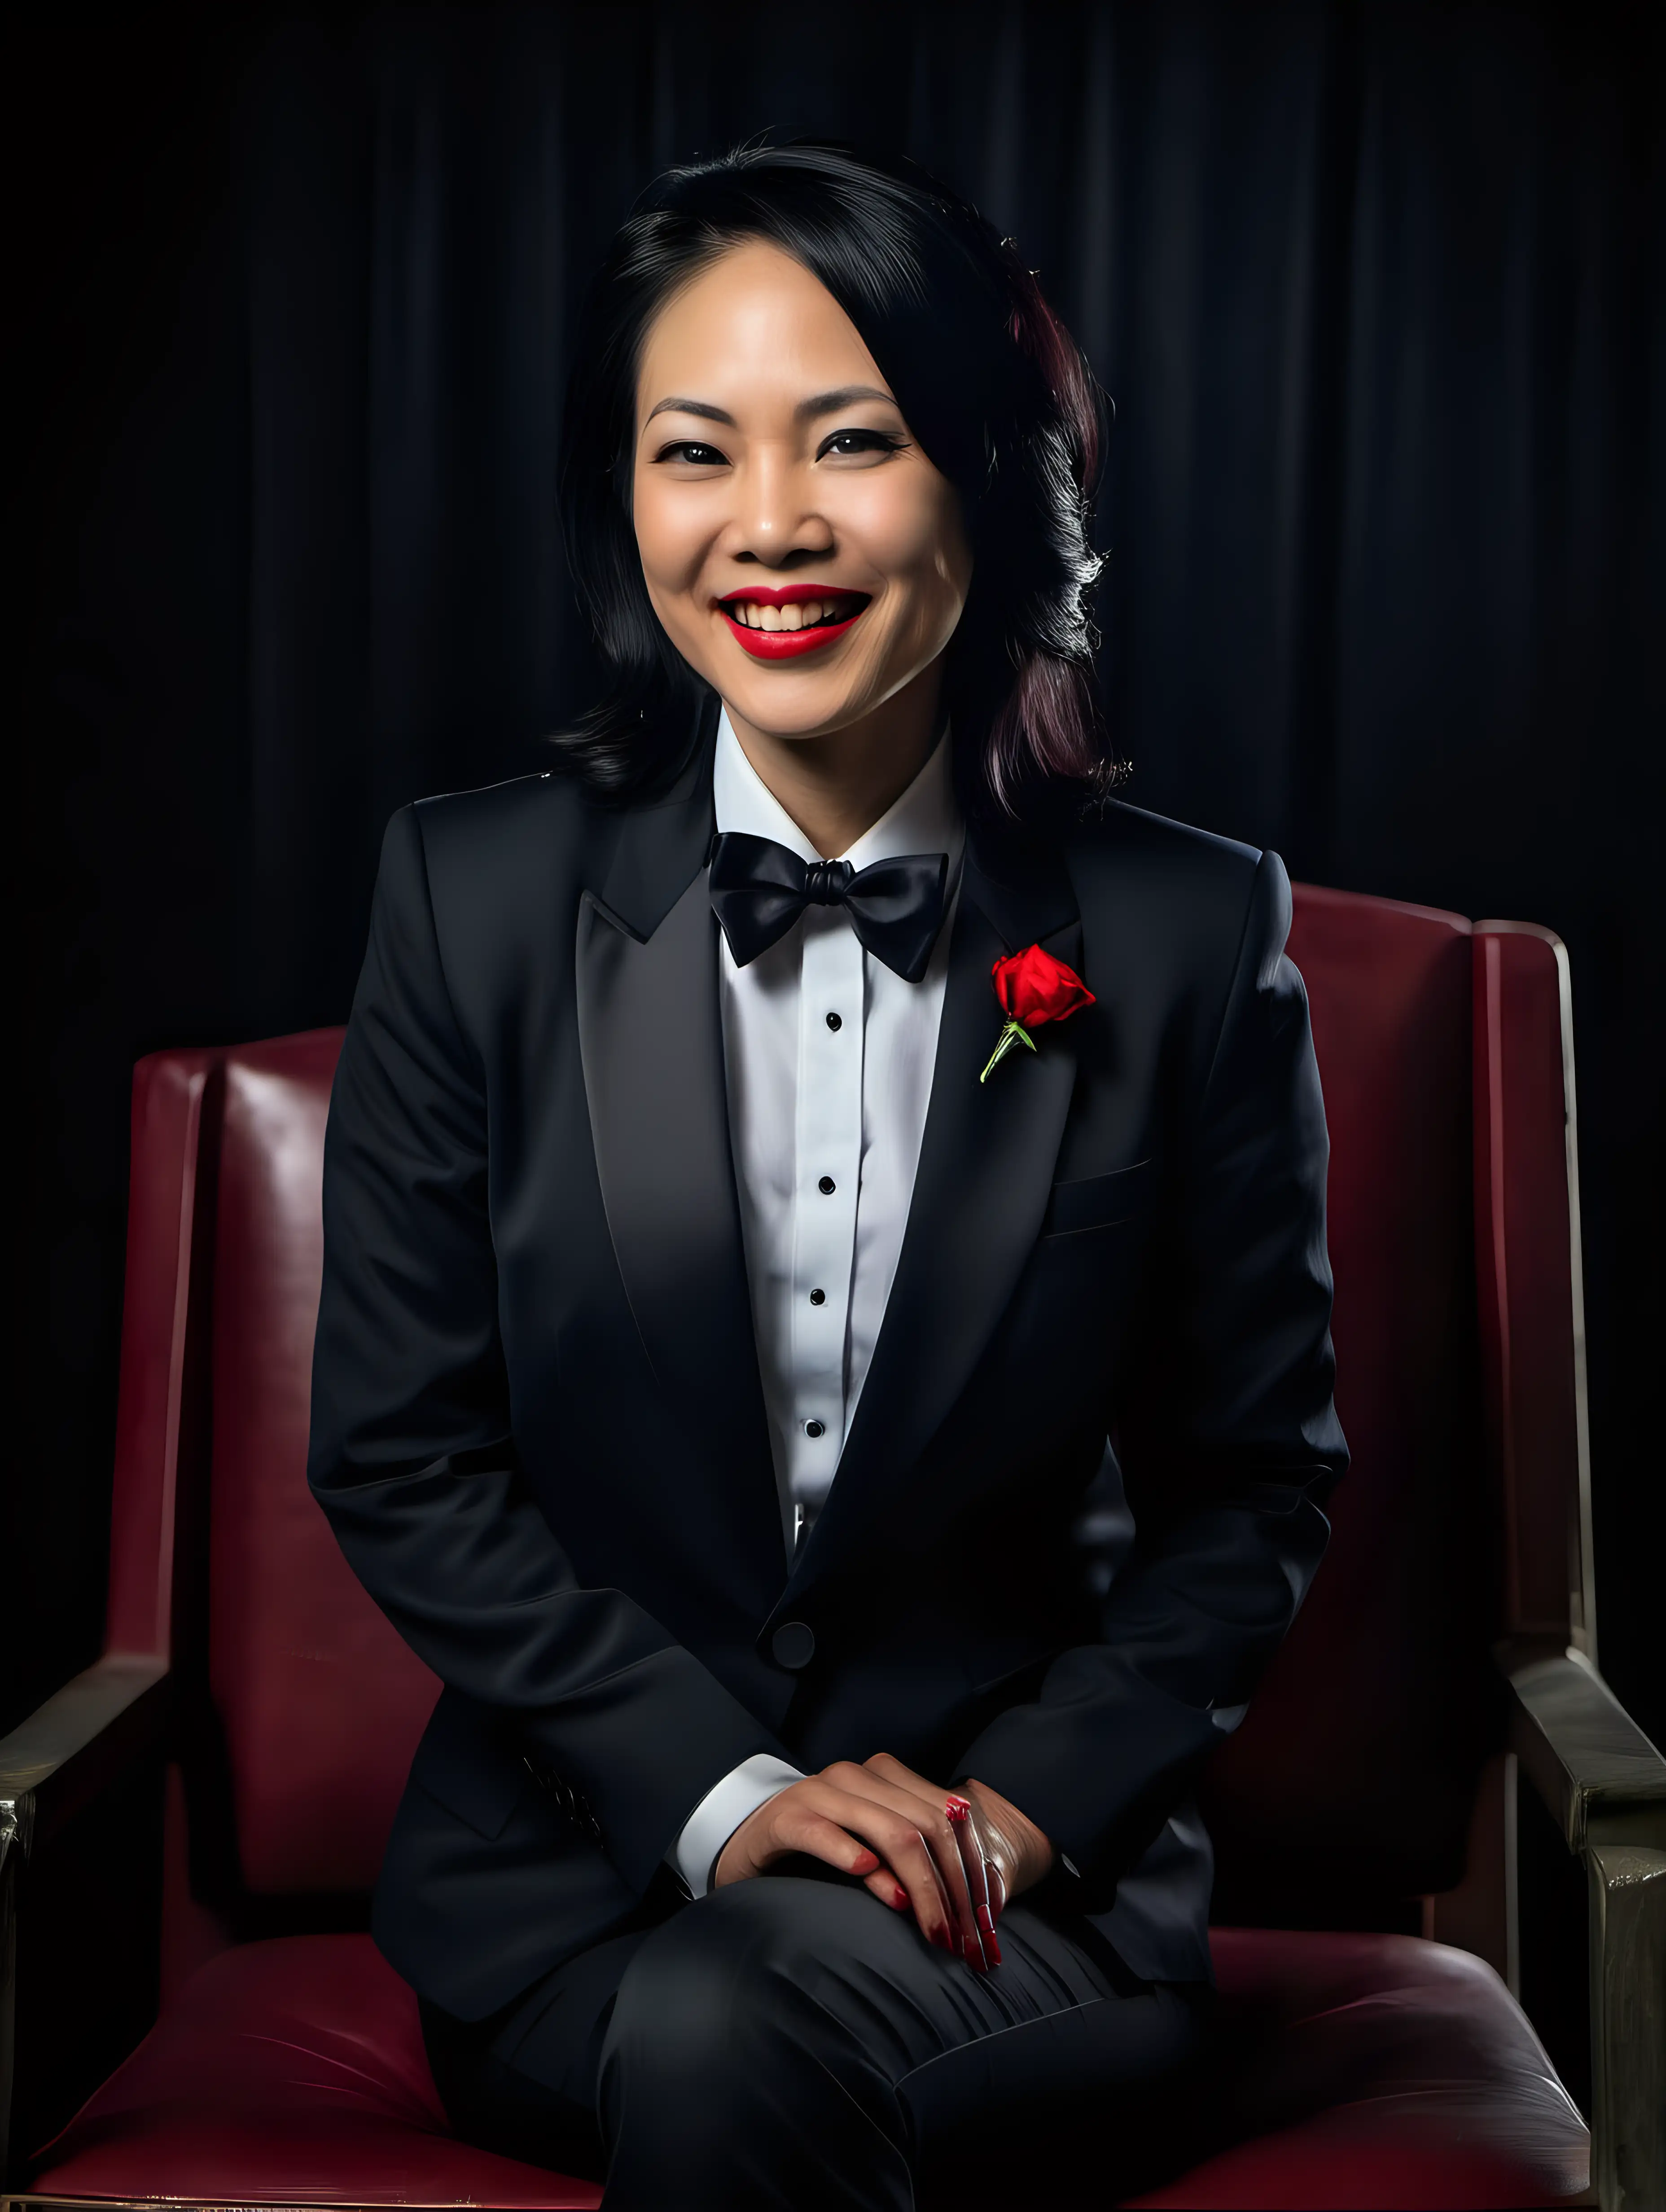 A portrait of a pretty 40 year old Vietnamese woman with shoulder length black hair and red lipstick is sitting in a chair in a dark room.  She is facing forward.  She is smiling and joyful and ecstatic.  She is wearing a tuxedo.  (Her jacket is open and not buttoned.) (Her pants are black.) Her shirt is white with a black bow tie.  Her cufflinks are large and black.  Her jacket is open and has a corsage. 